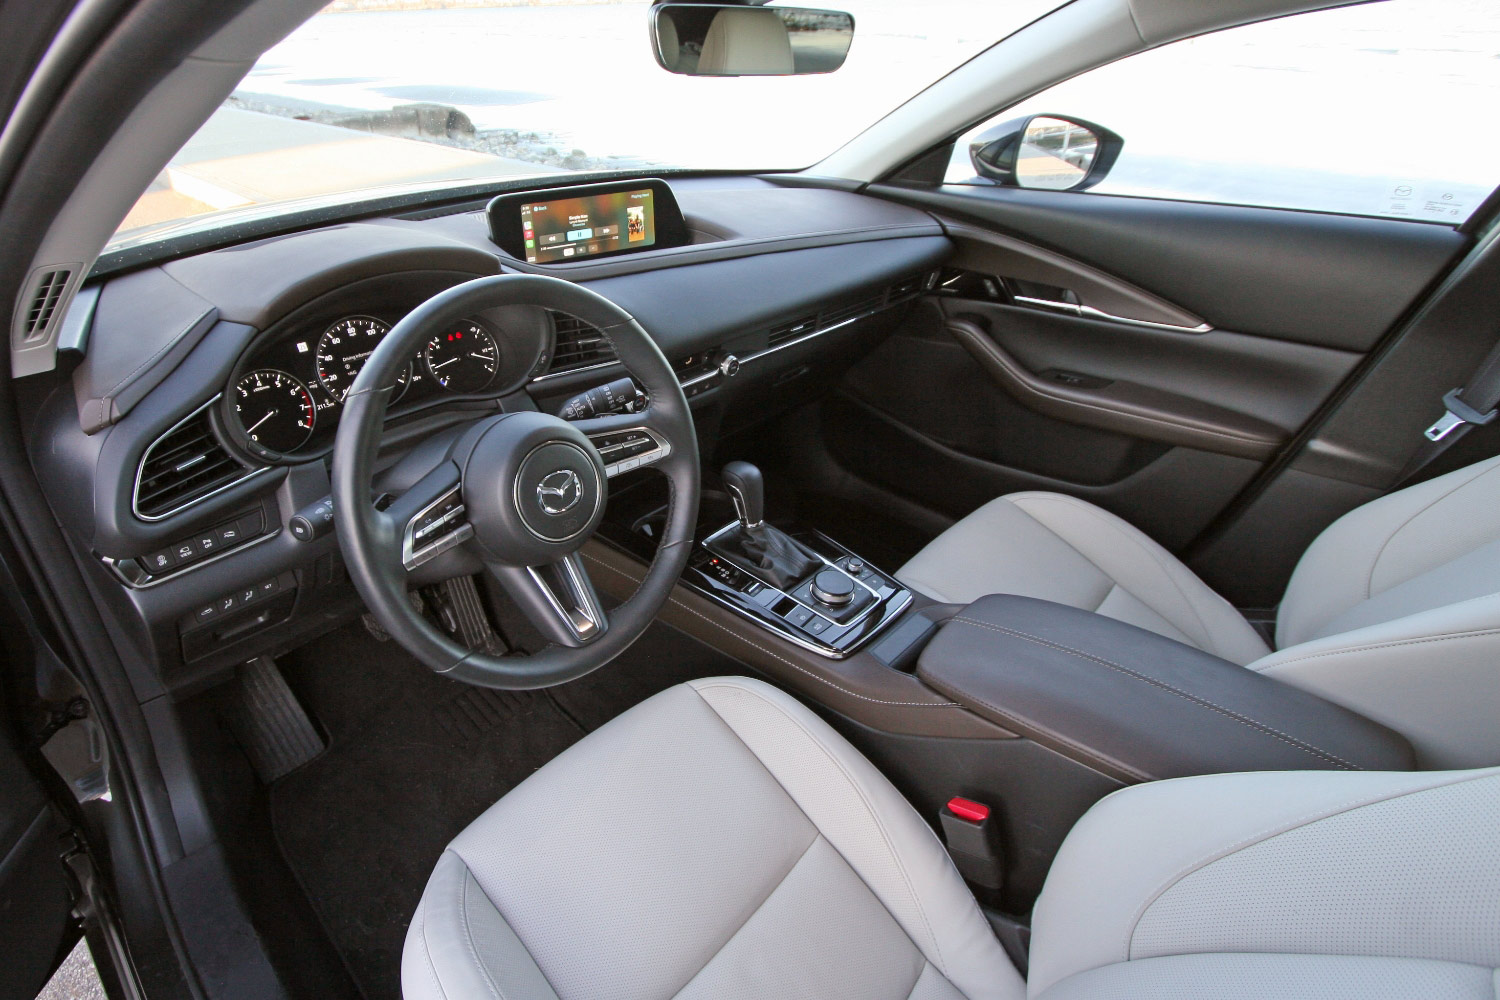 Interior of a Mazda CX-30 that shows the dashboard, steering wheel, front seats, and center console.